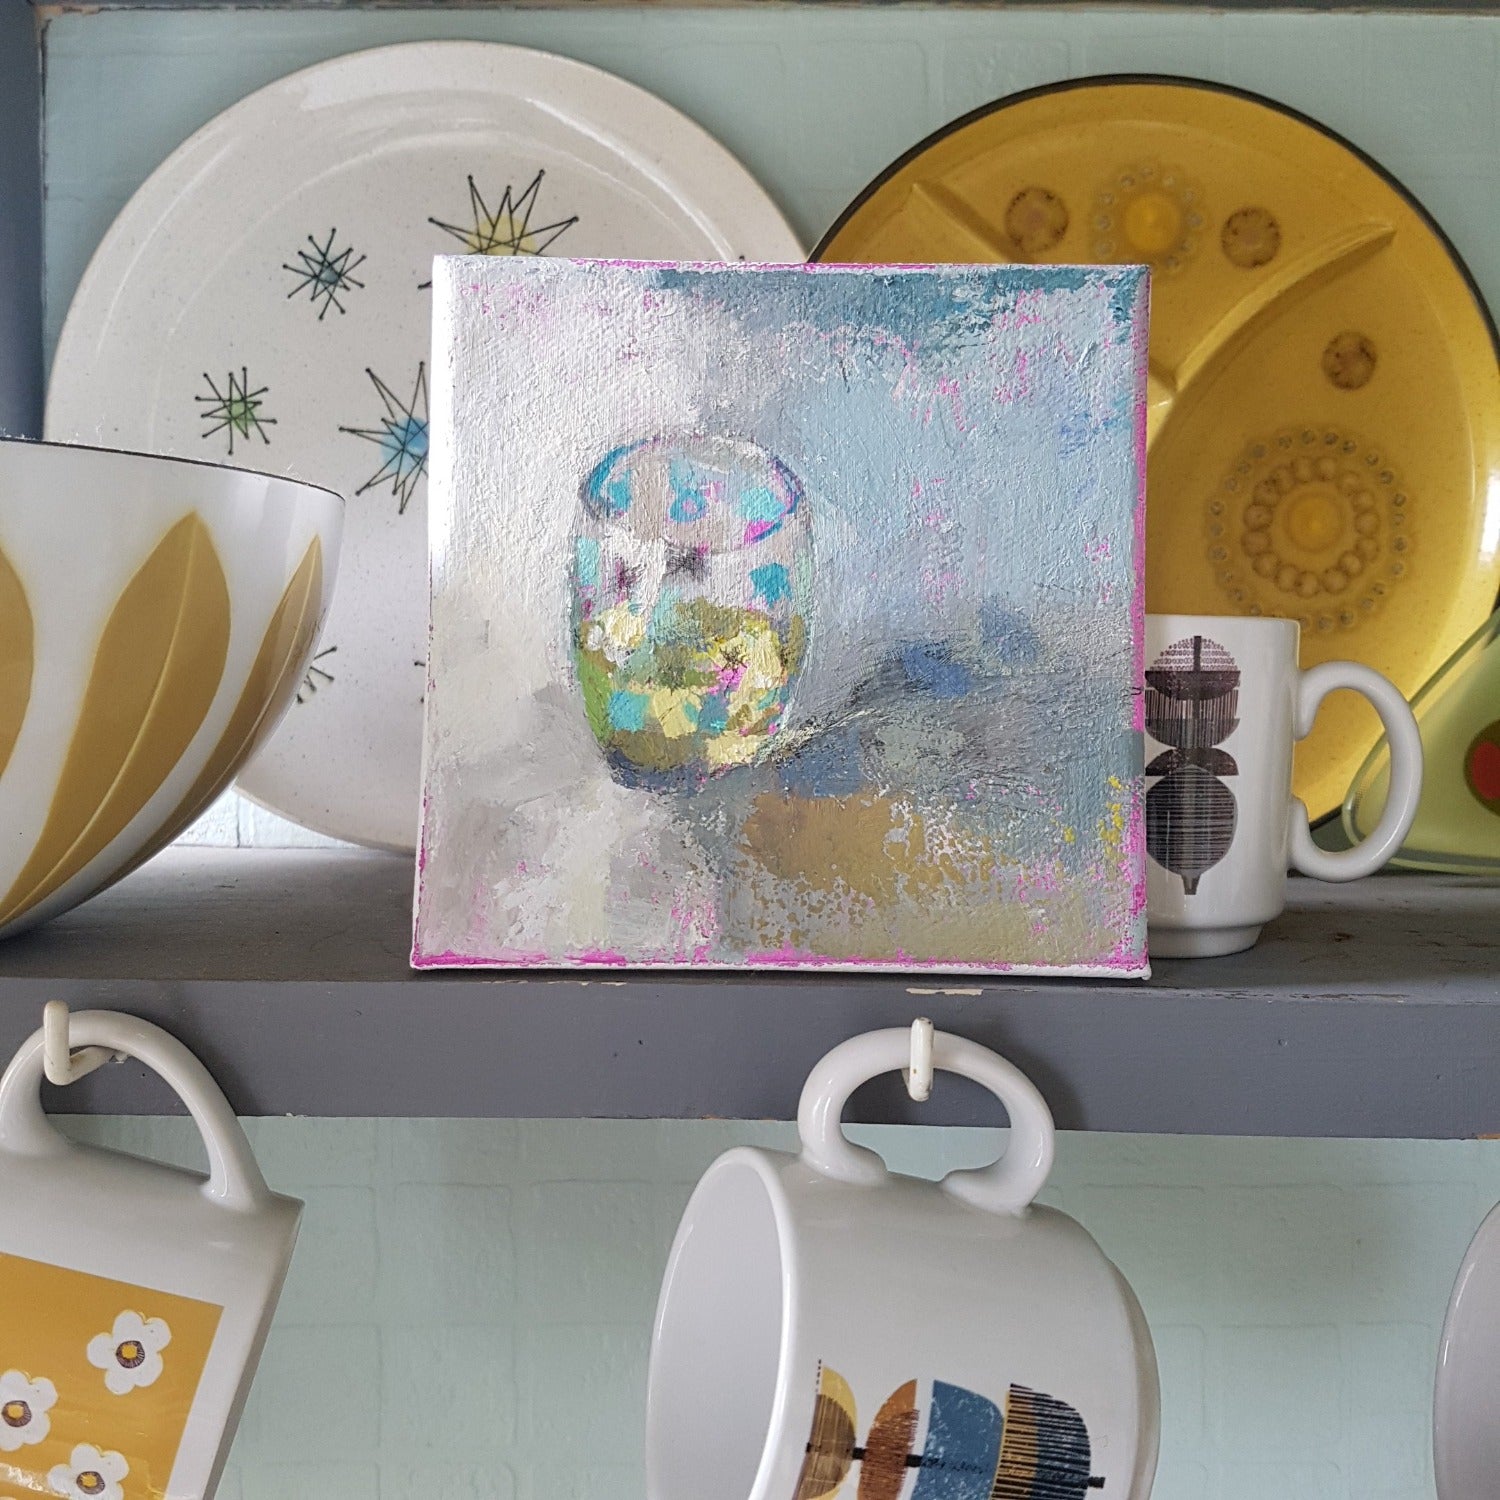 Painting by Julia Laing sitting on a shelf beside midcentury design bowls and plates.